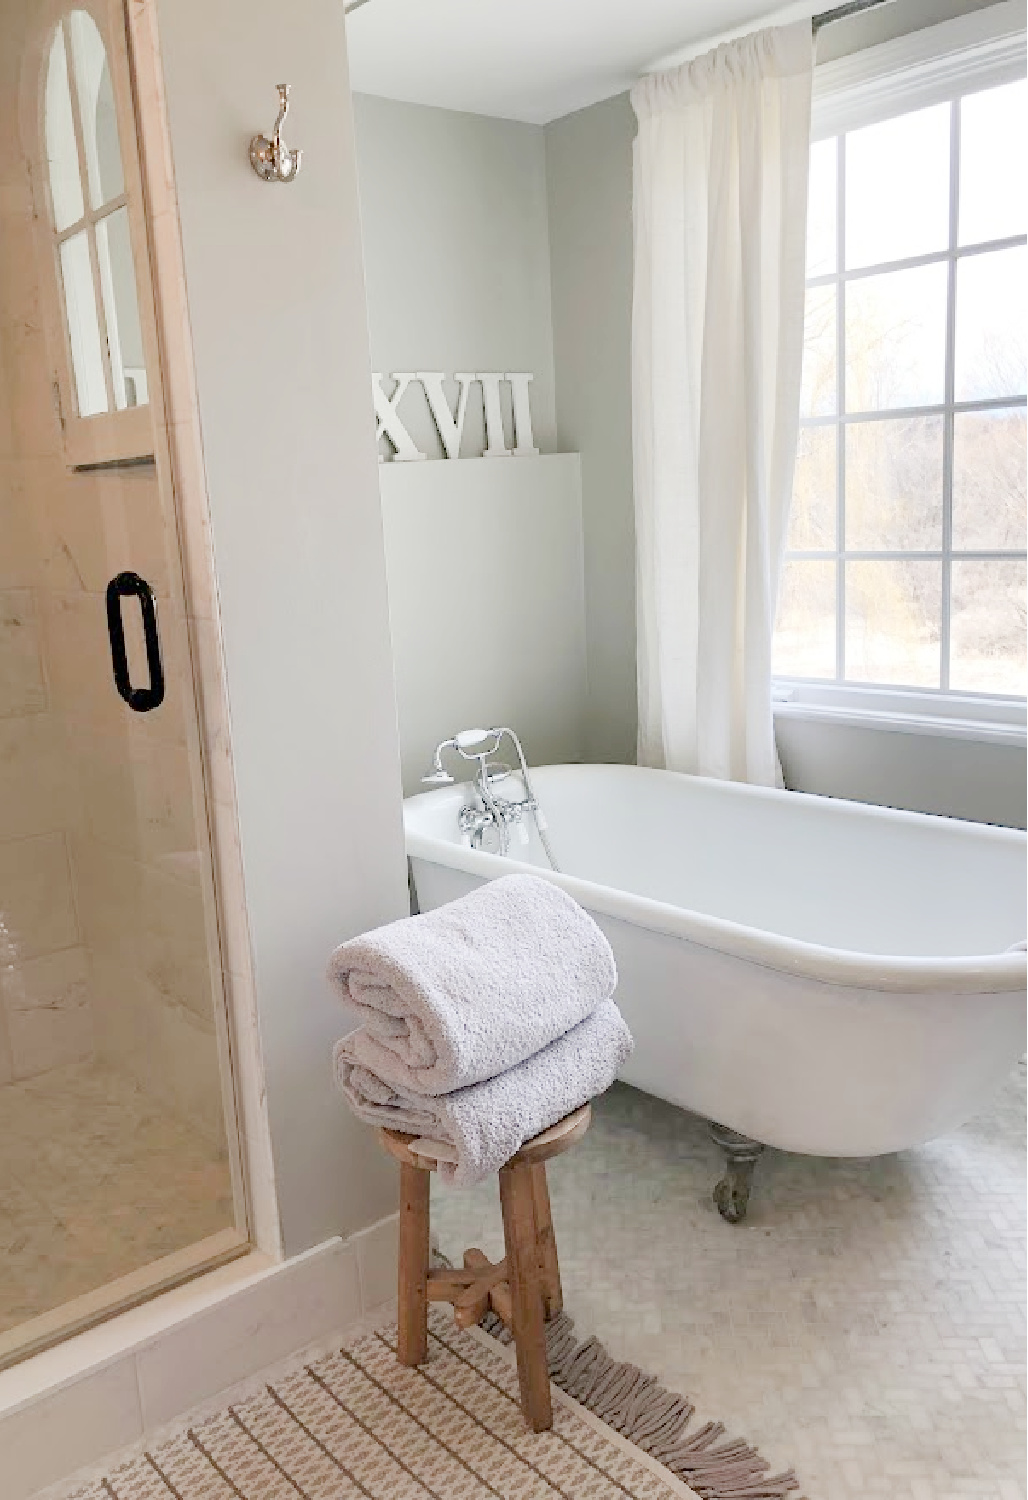 SW Repose Gray walls in modern French renovated bath with vintage clawfoot tub - Hello Lovely Studio. #swreposegray